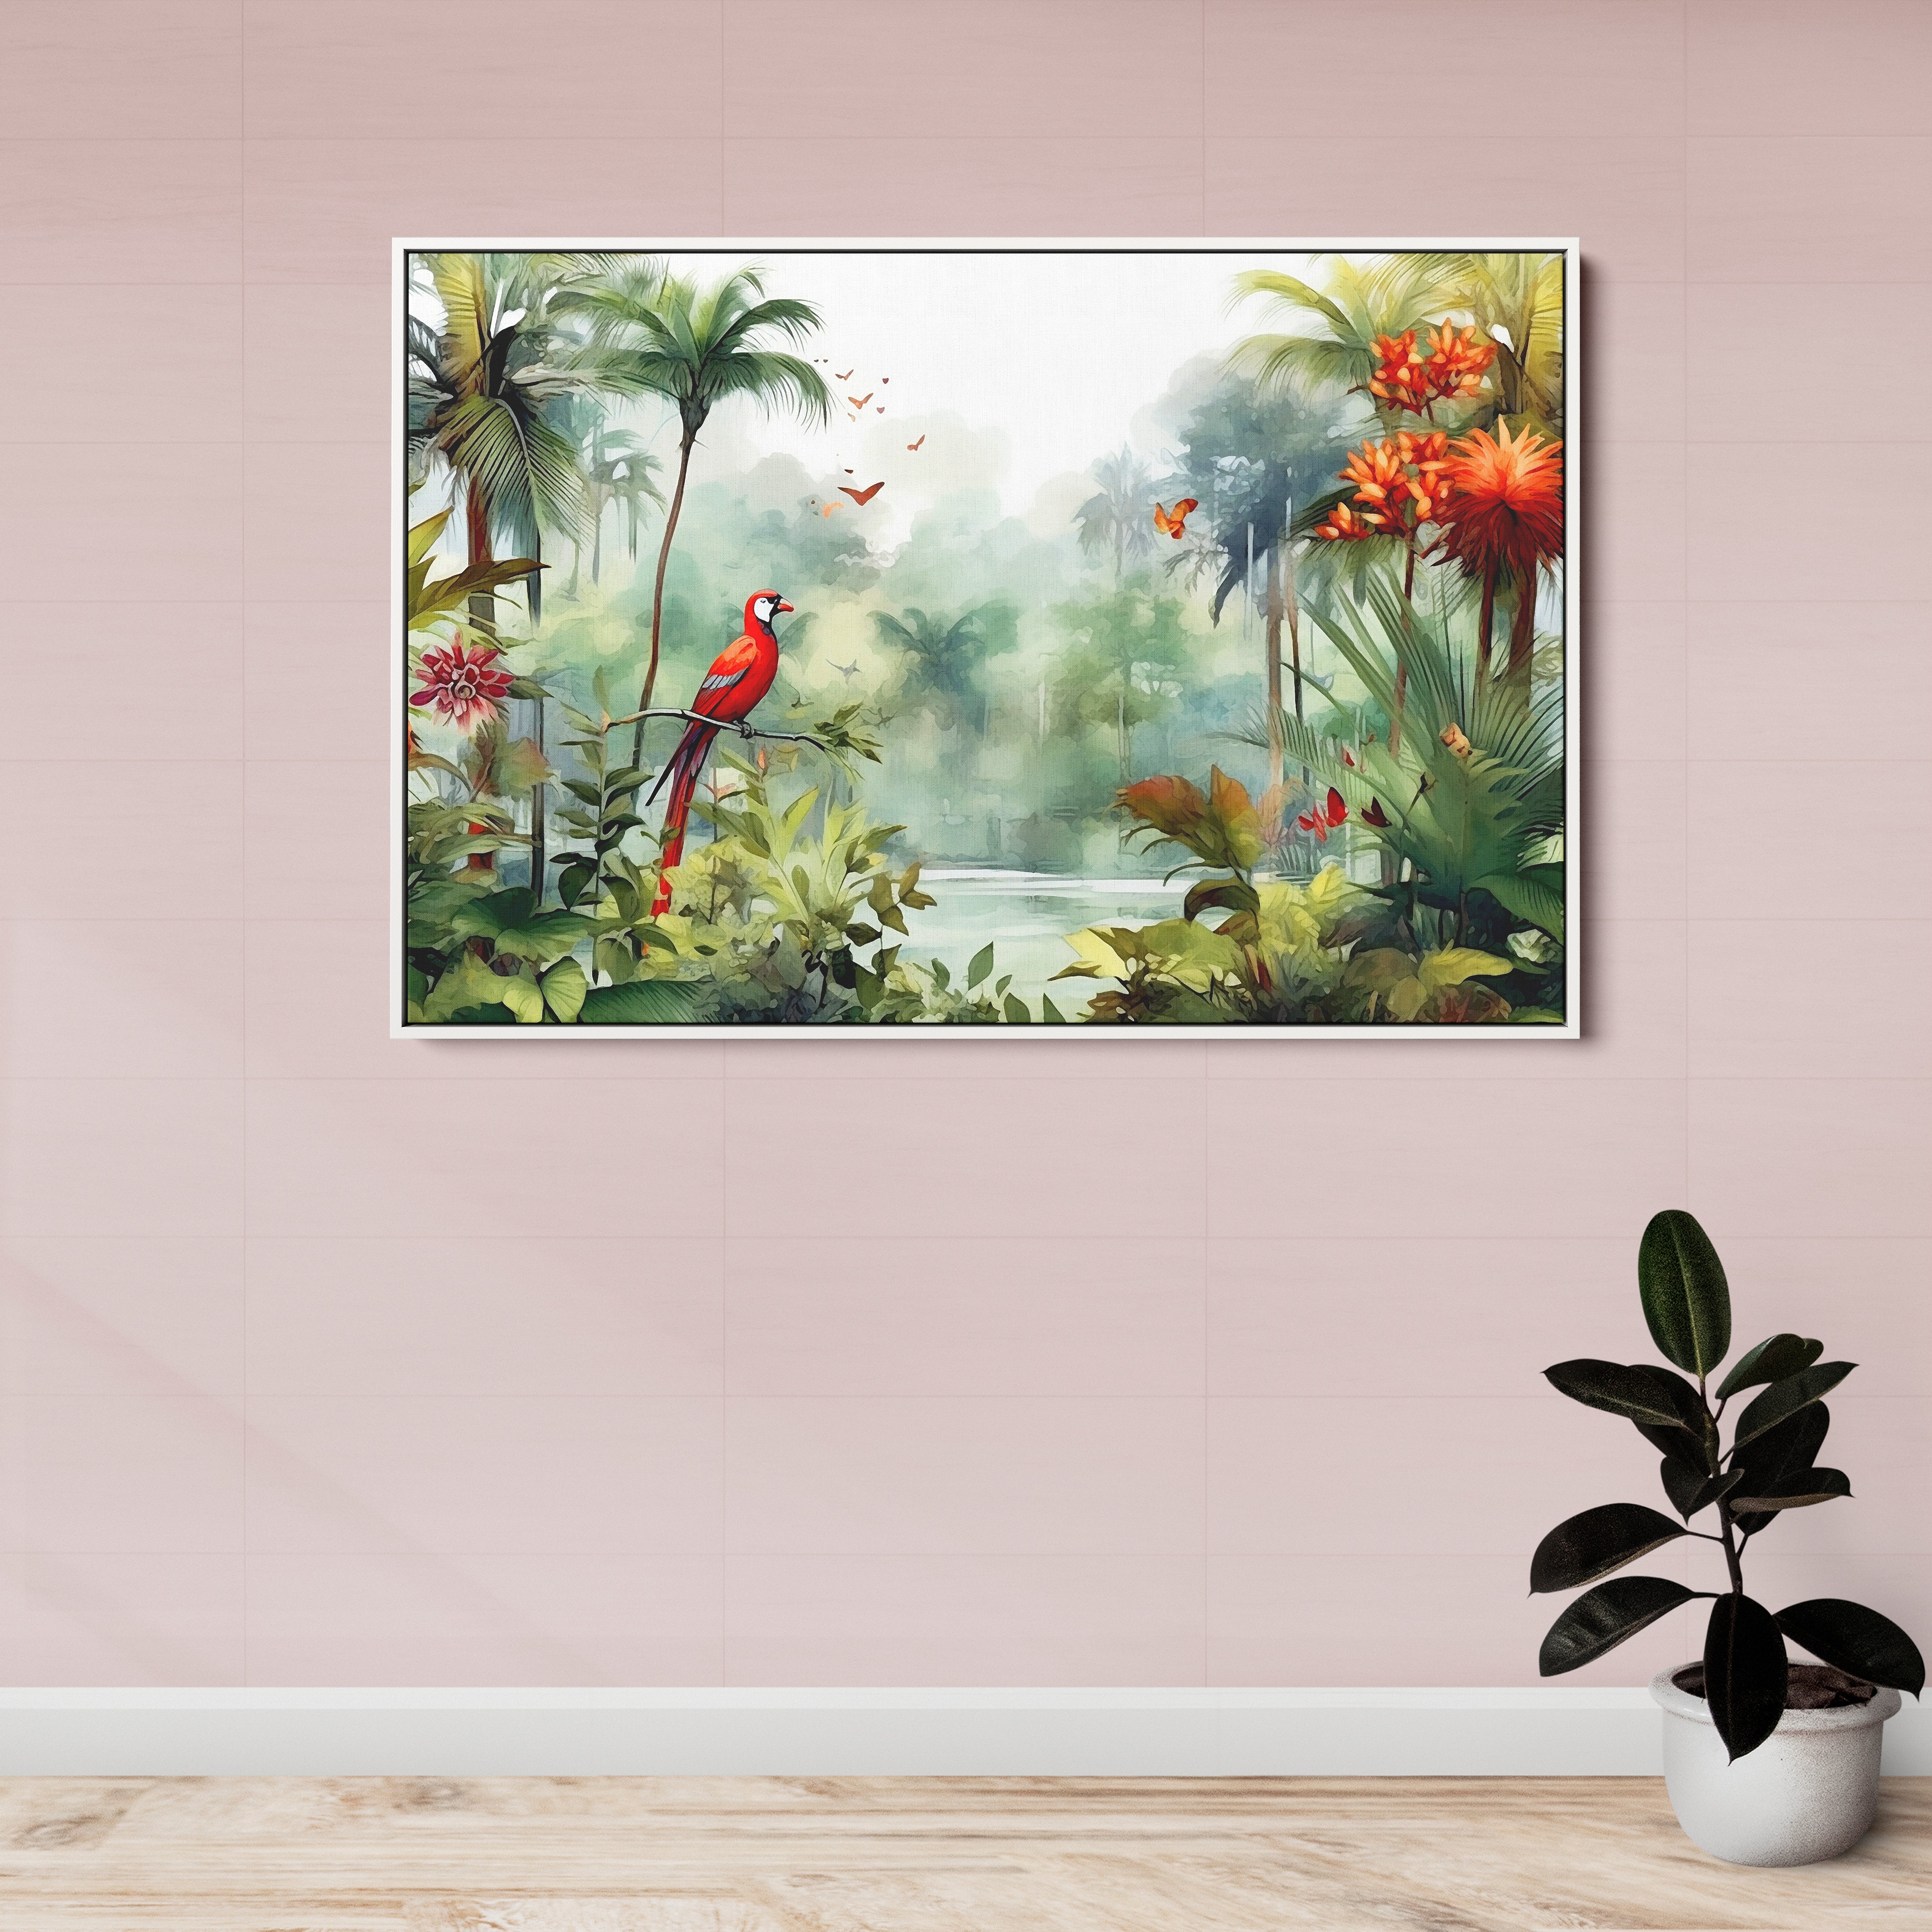 Red Birds and Jungle View Abstract Art Canvas Wall Painting